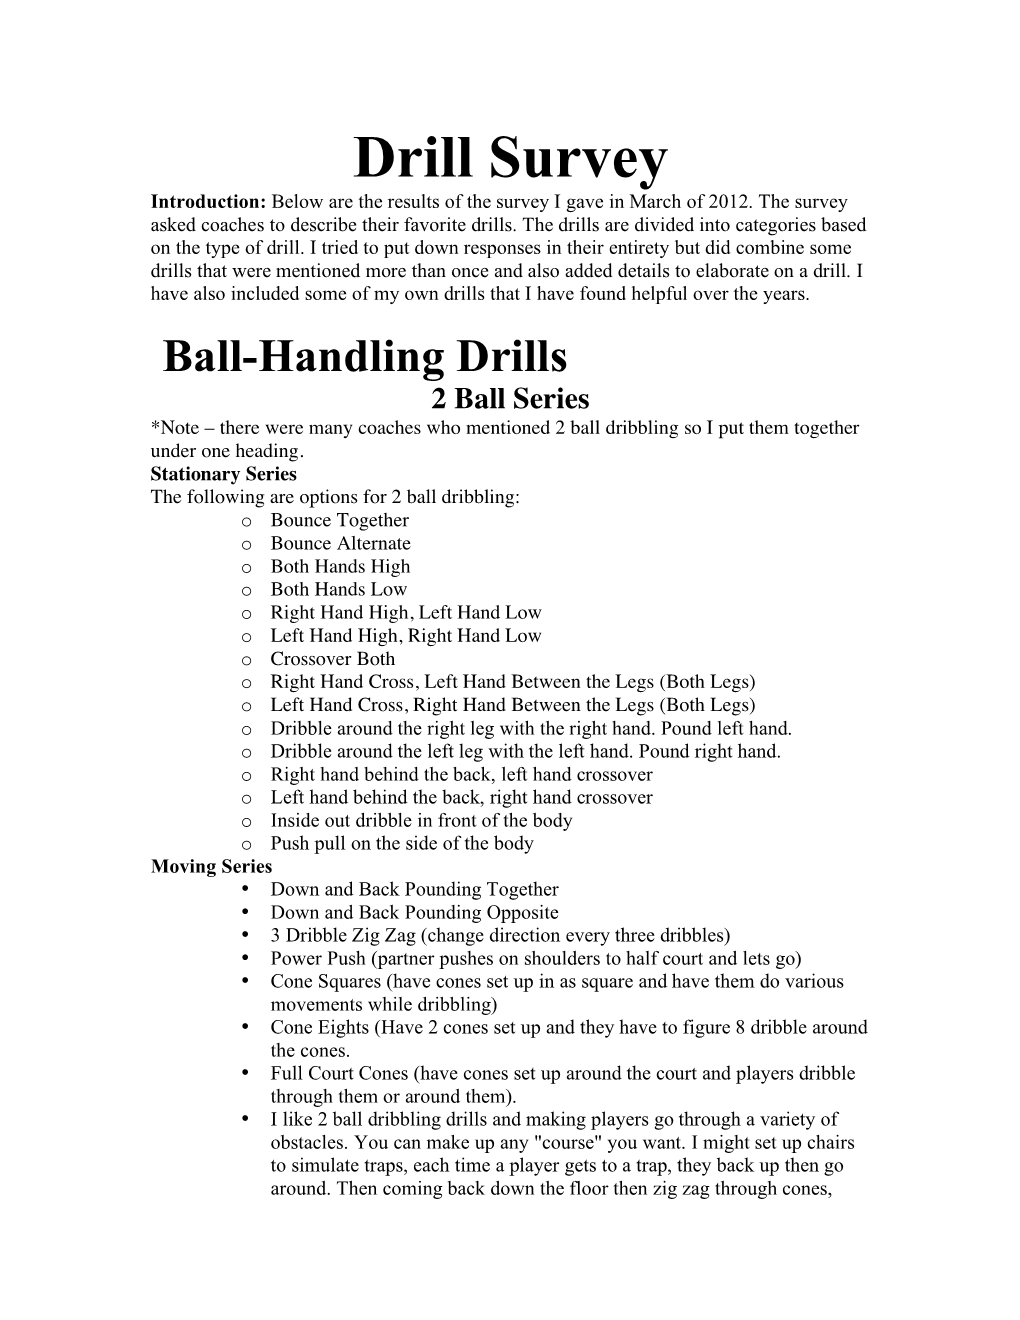 Drill Survey Introduction: Below Are the Results of the Survey I Gave in March of 2012